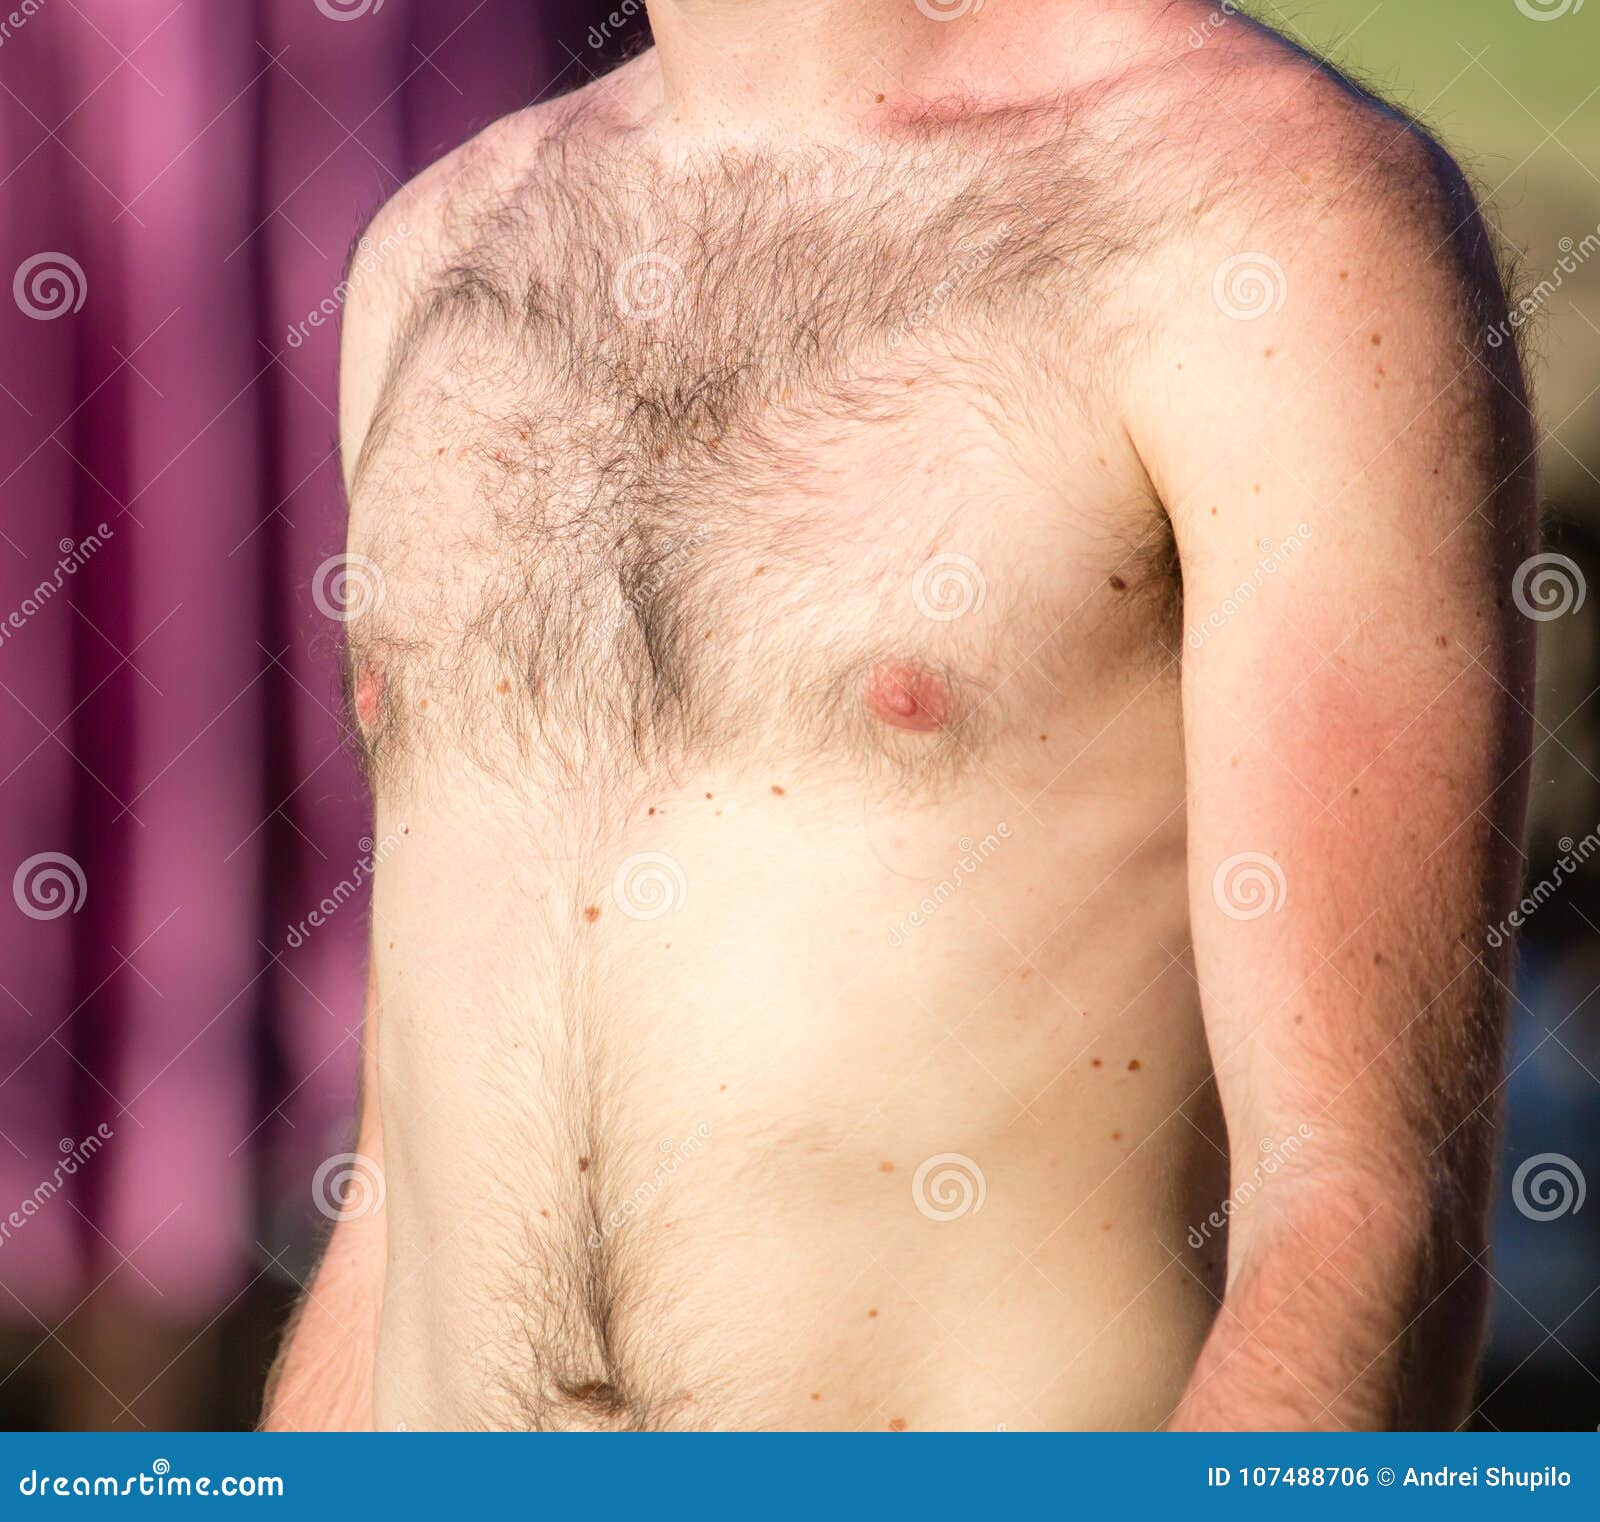 460+ Hairy Chested Young Men Stock Photos, Pictures &